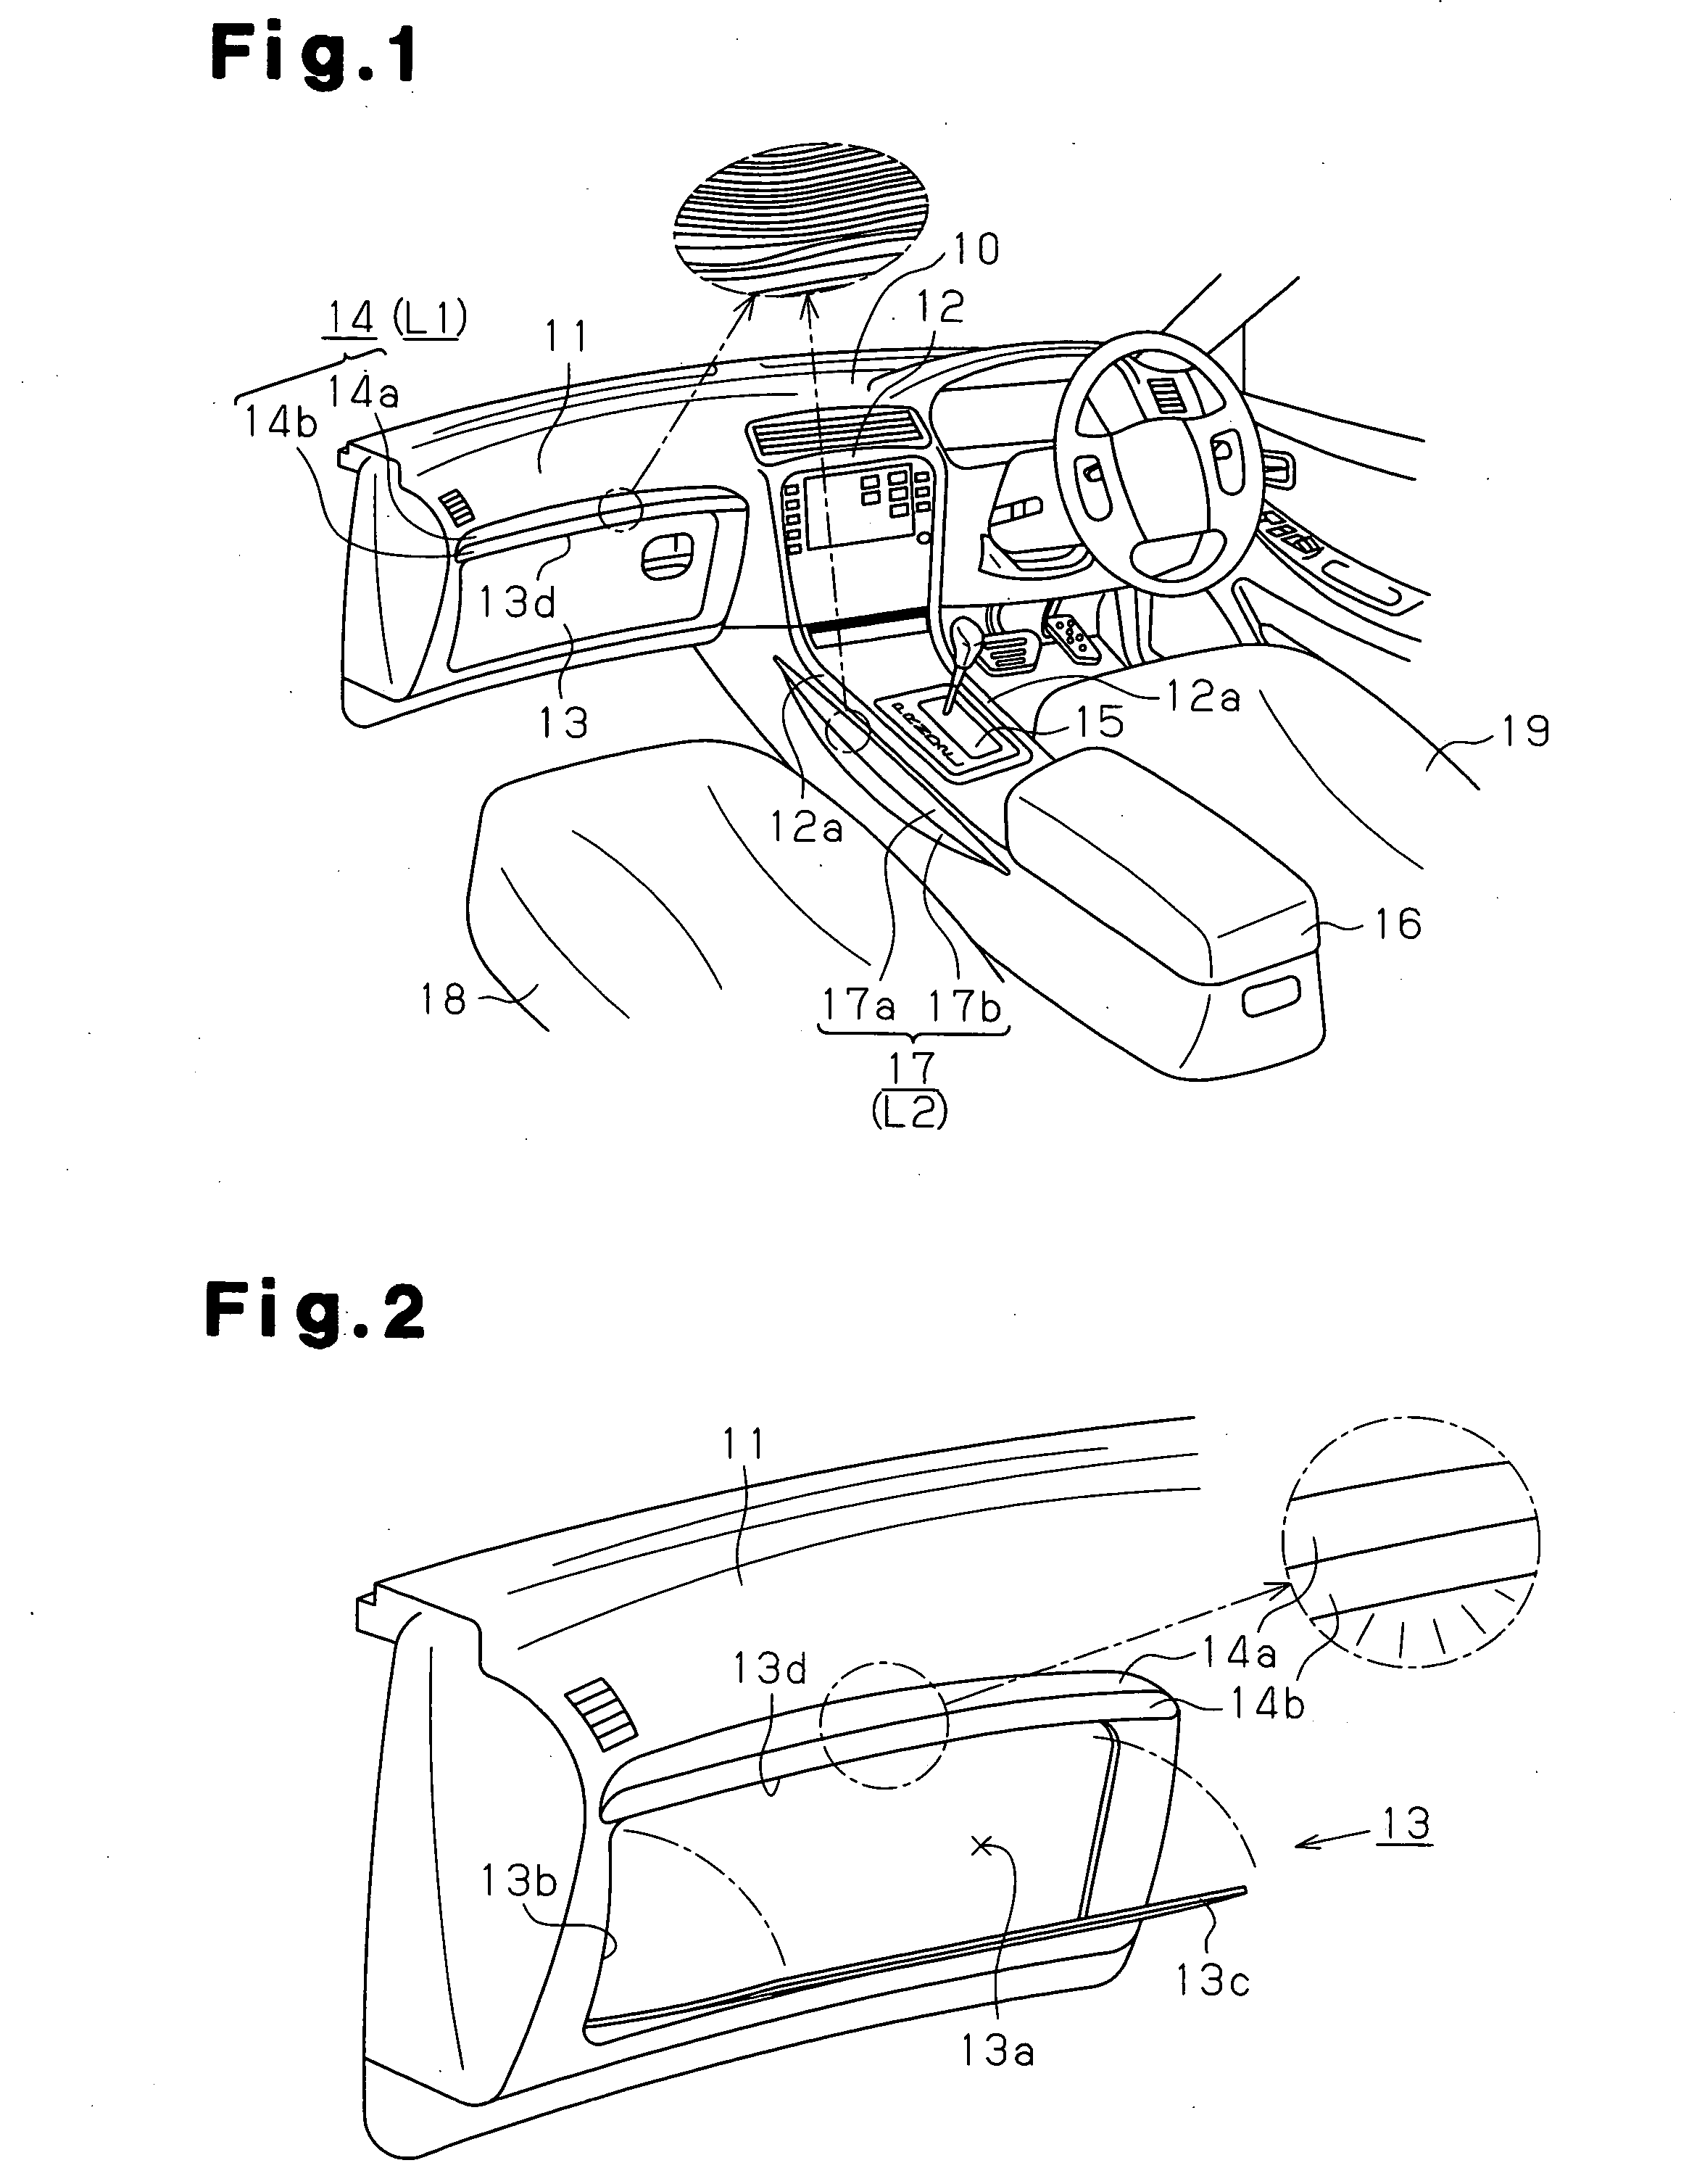 Lighting apparatus for vehicle